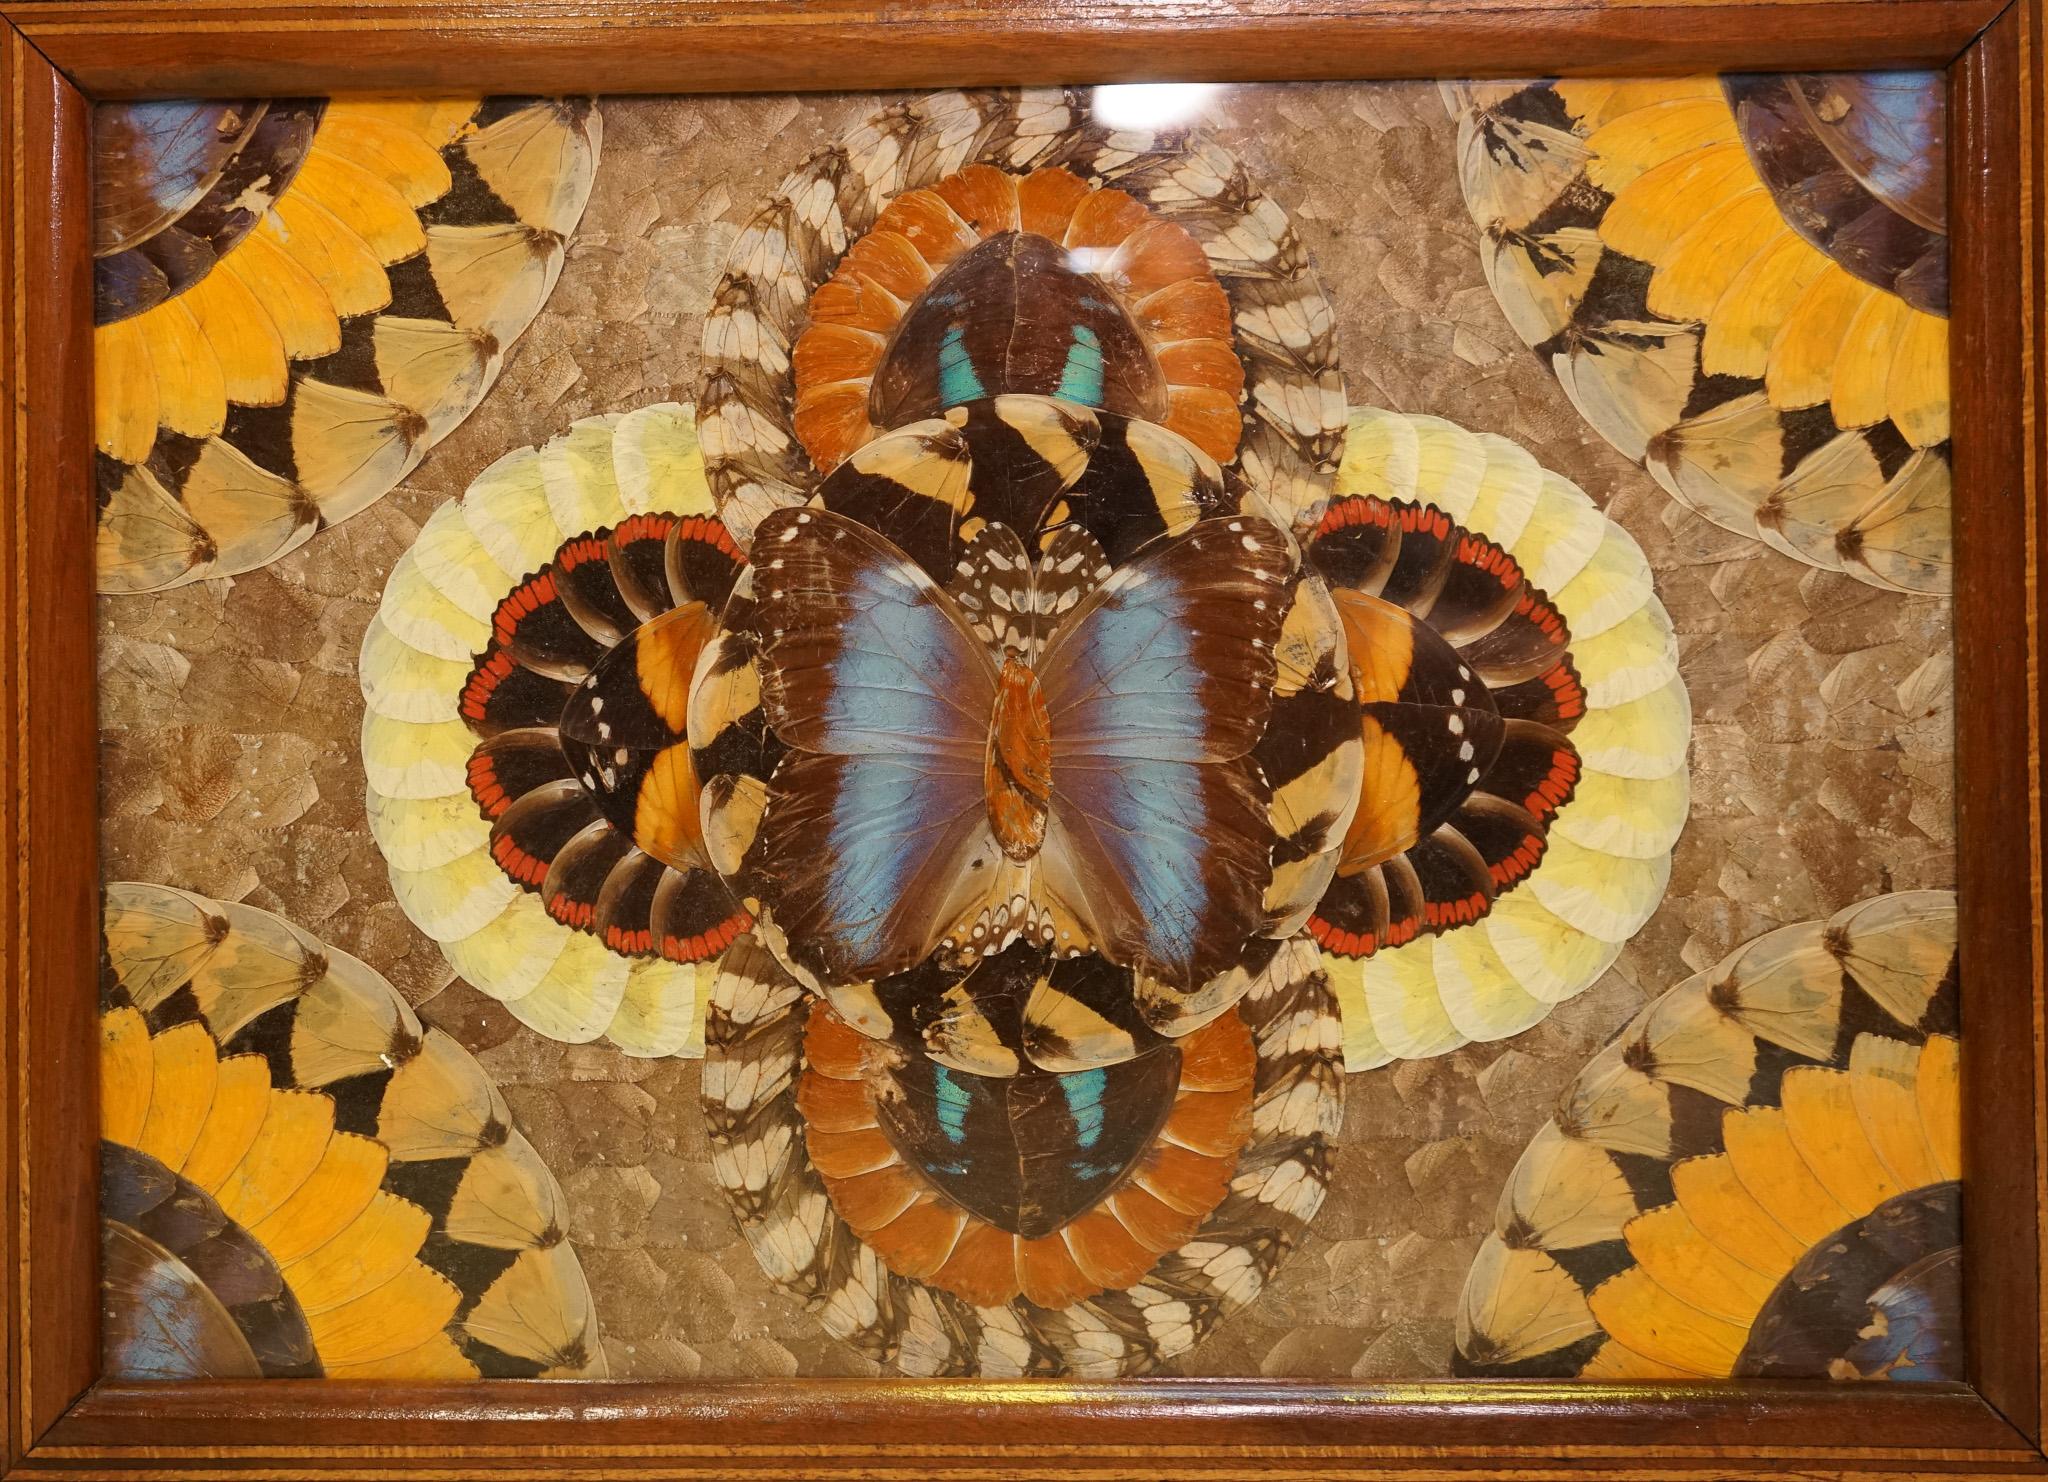 We are excited to present this vintage Brazilian inlaid wood tray with real Morpho butterfly wings.

A Brazilian inlaid wood tray with real morpho butterfly wings is a stunning piece of art that showcases the beauty of nature. The tray is made